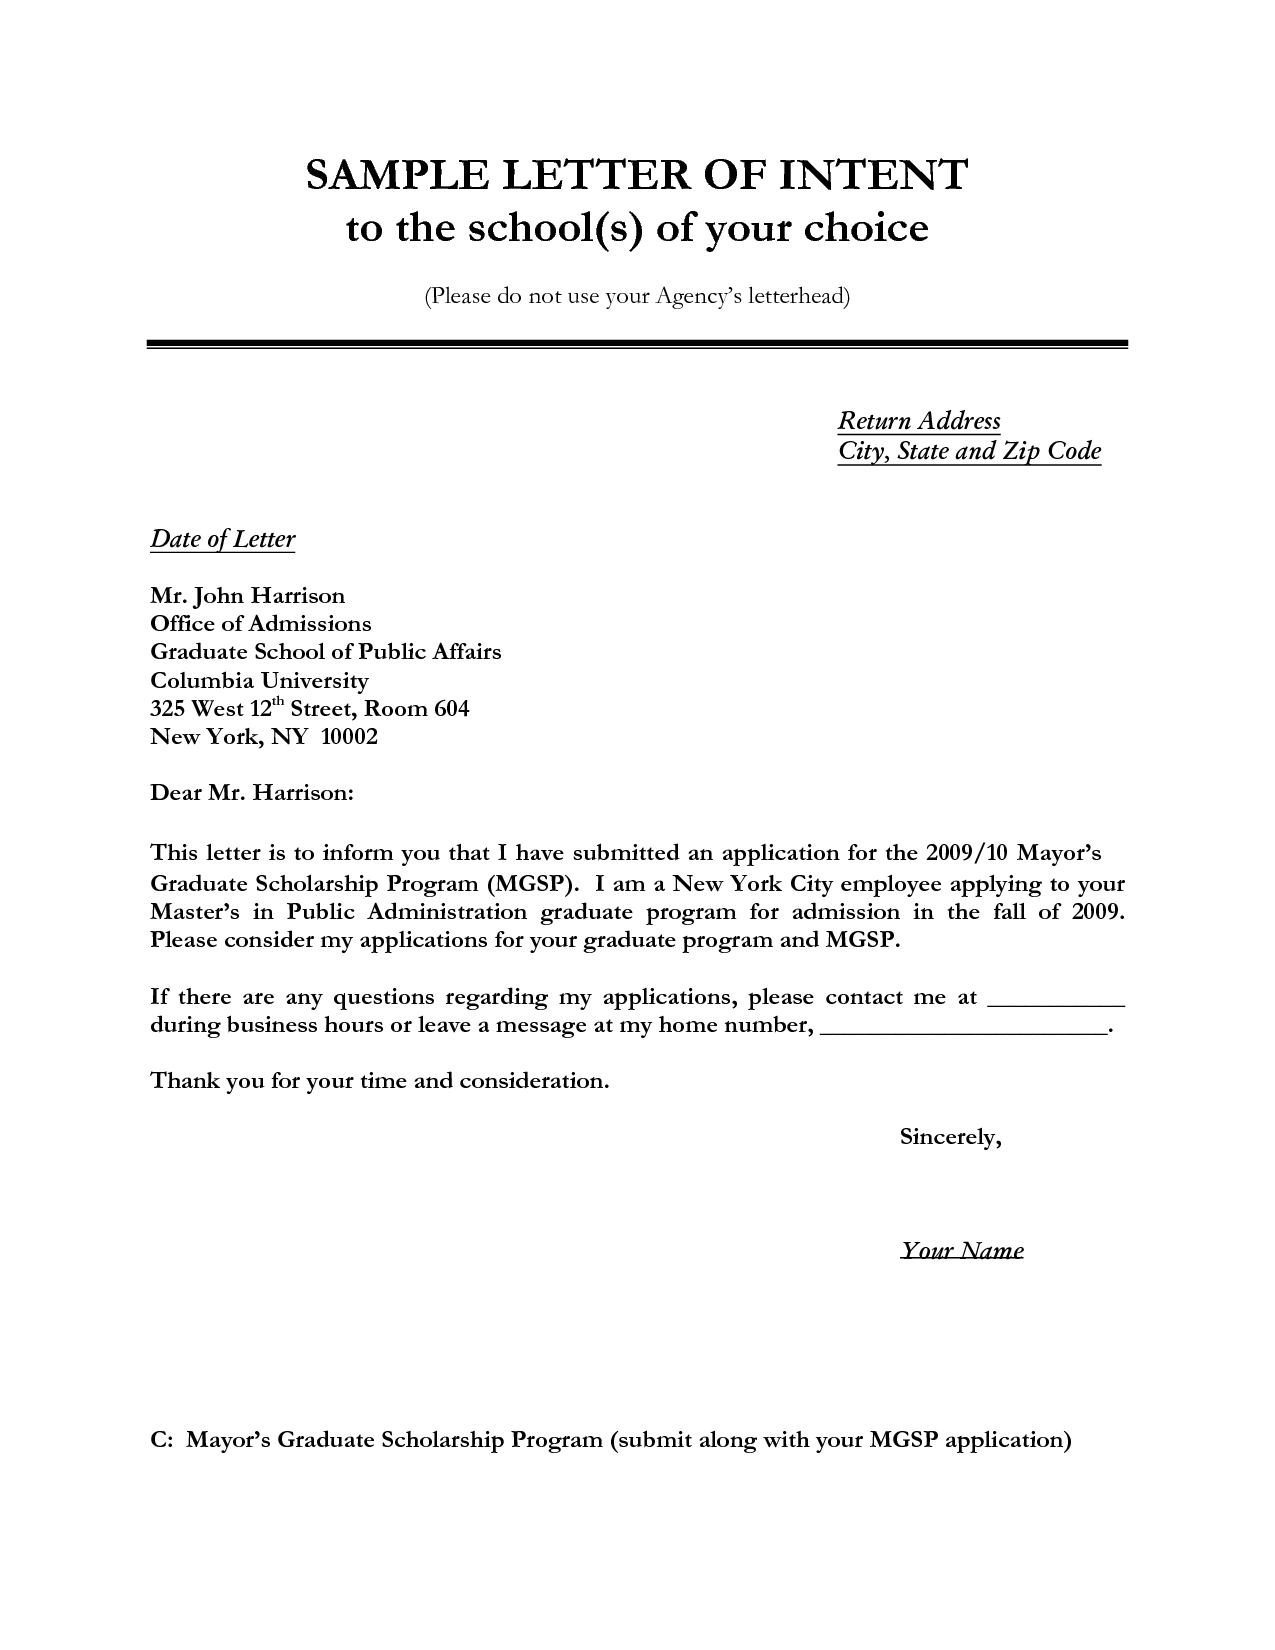 Non Compete Release Letter Template - Letter Of Intent Sample